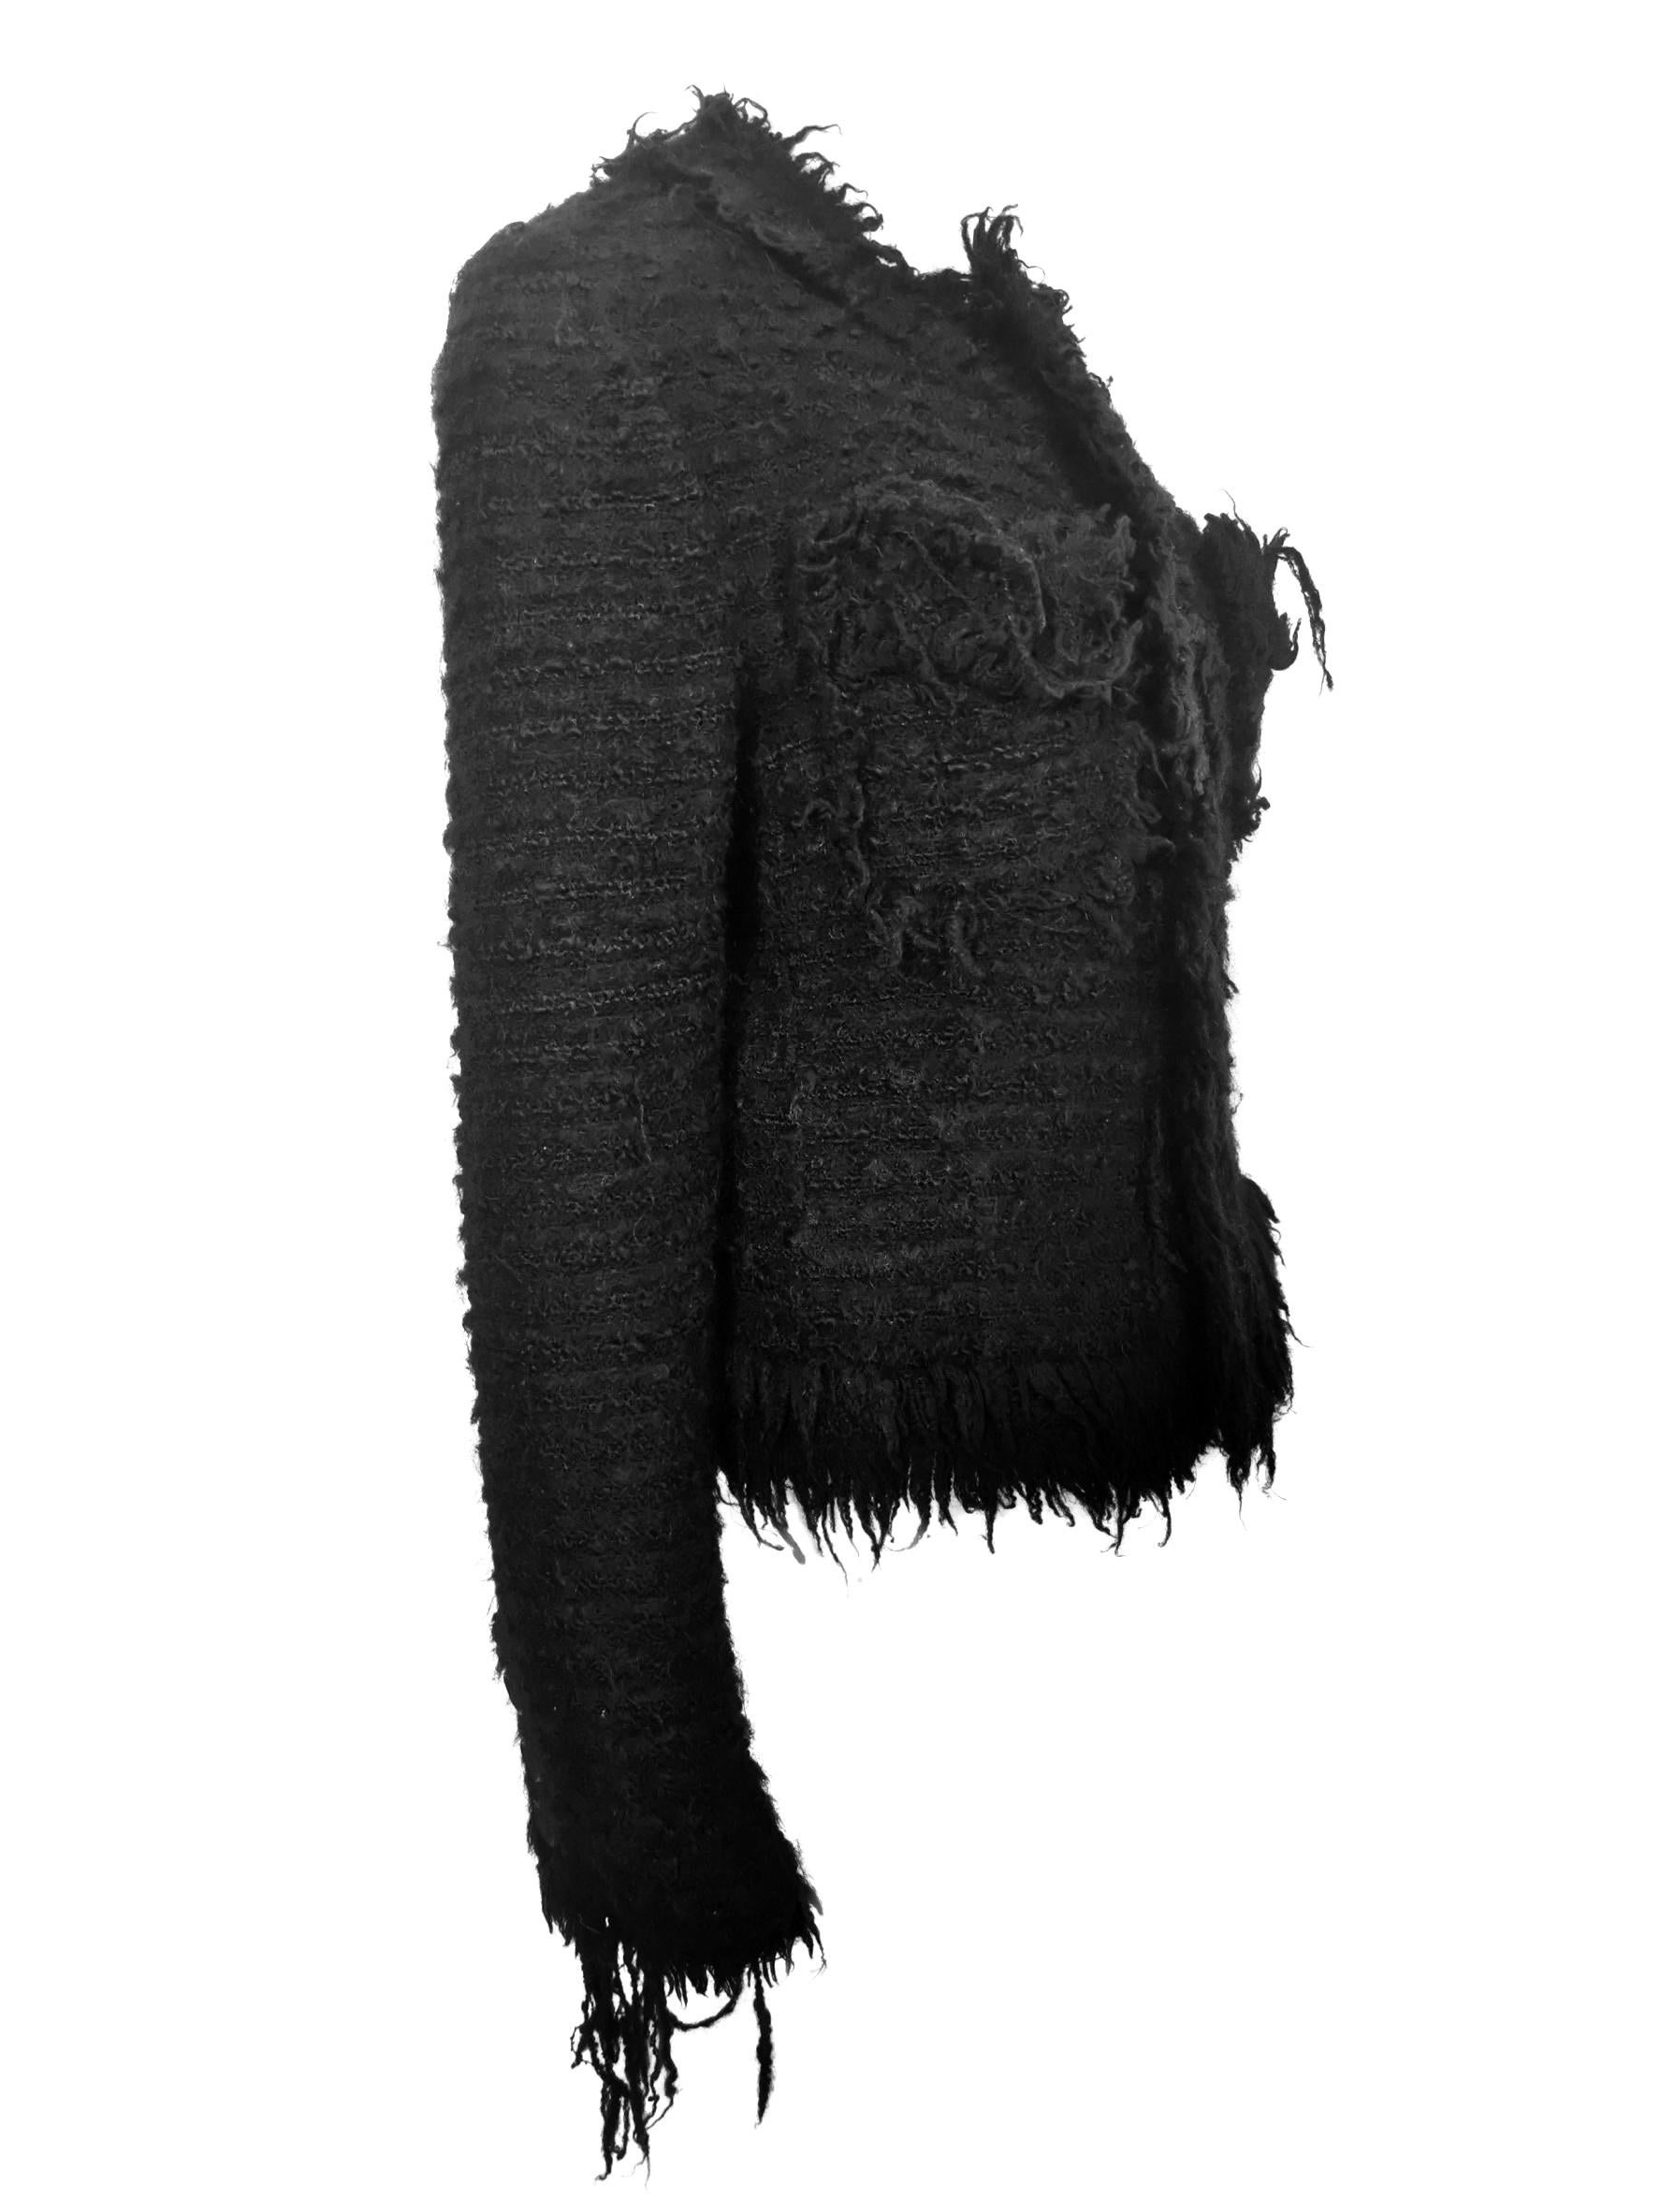 Comme des Garcons Junya Watanabe Cropped Chanel Style Fringed Jacket AD 2003 5